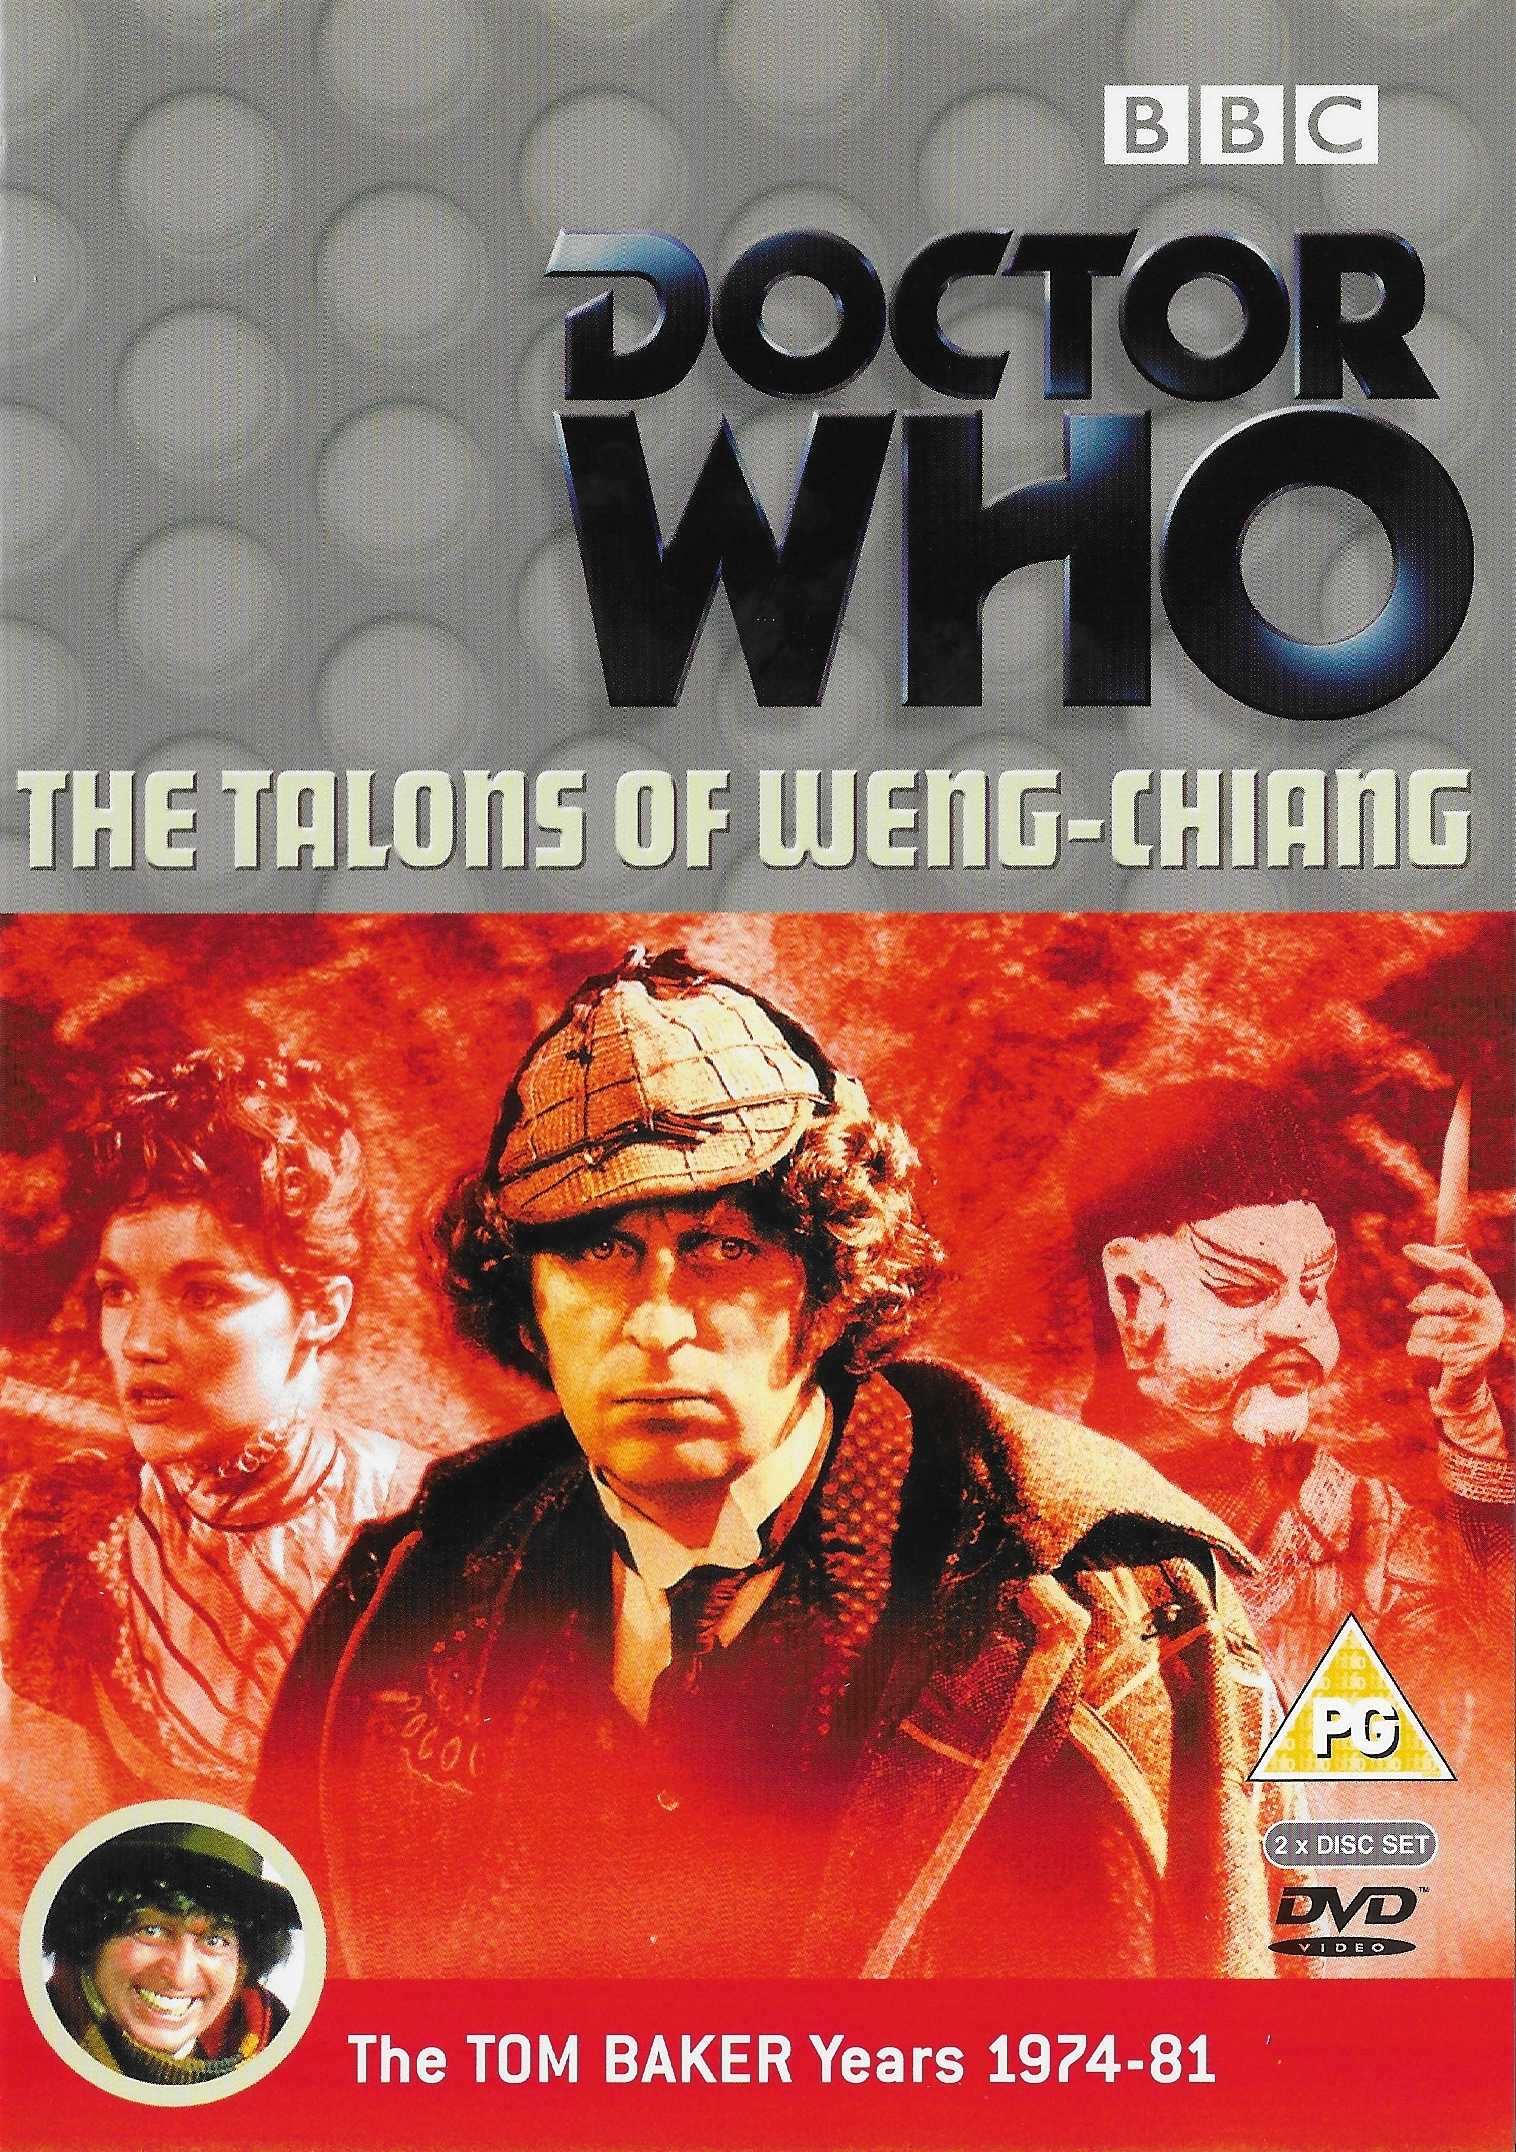 Picture of BBCDVD 1152 Doctor Who - The talons of Weng-Chiang by artist Robert Holmes from the BBC records and Tapes library